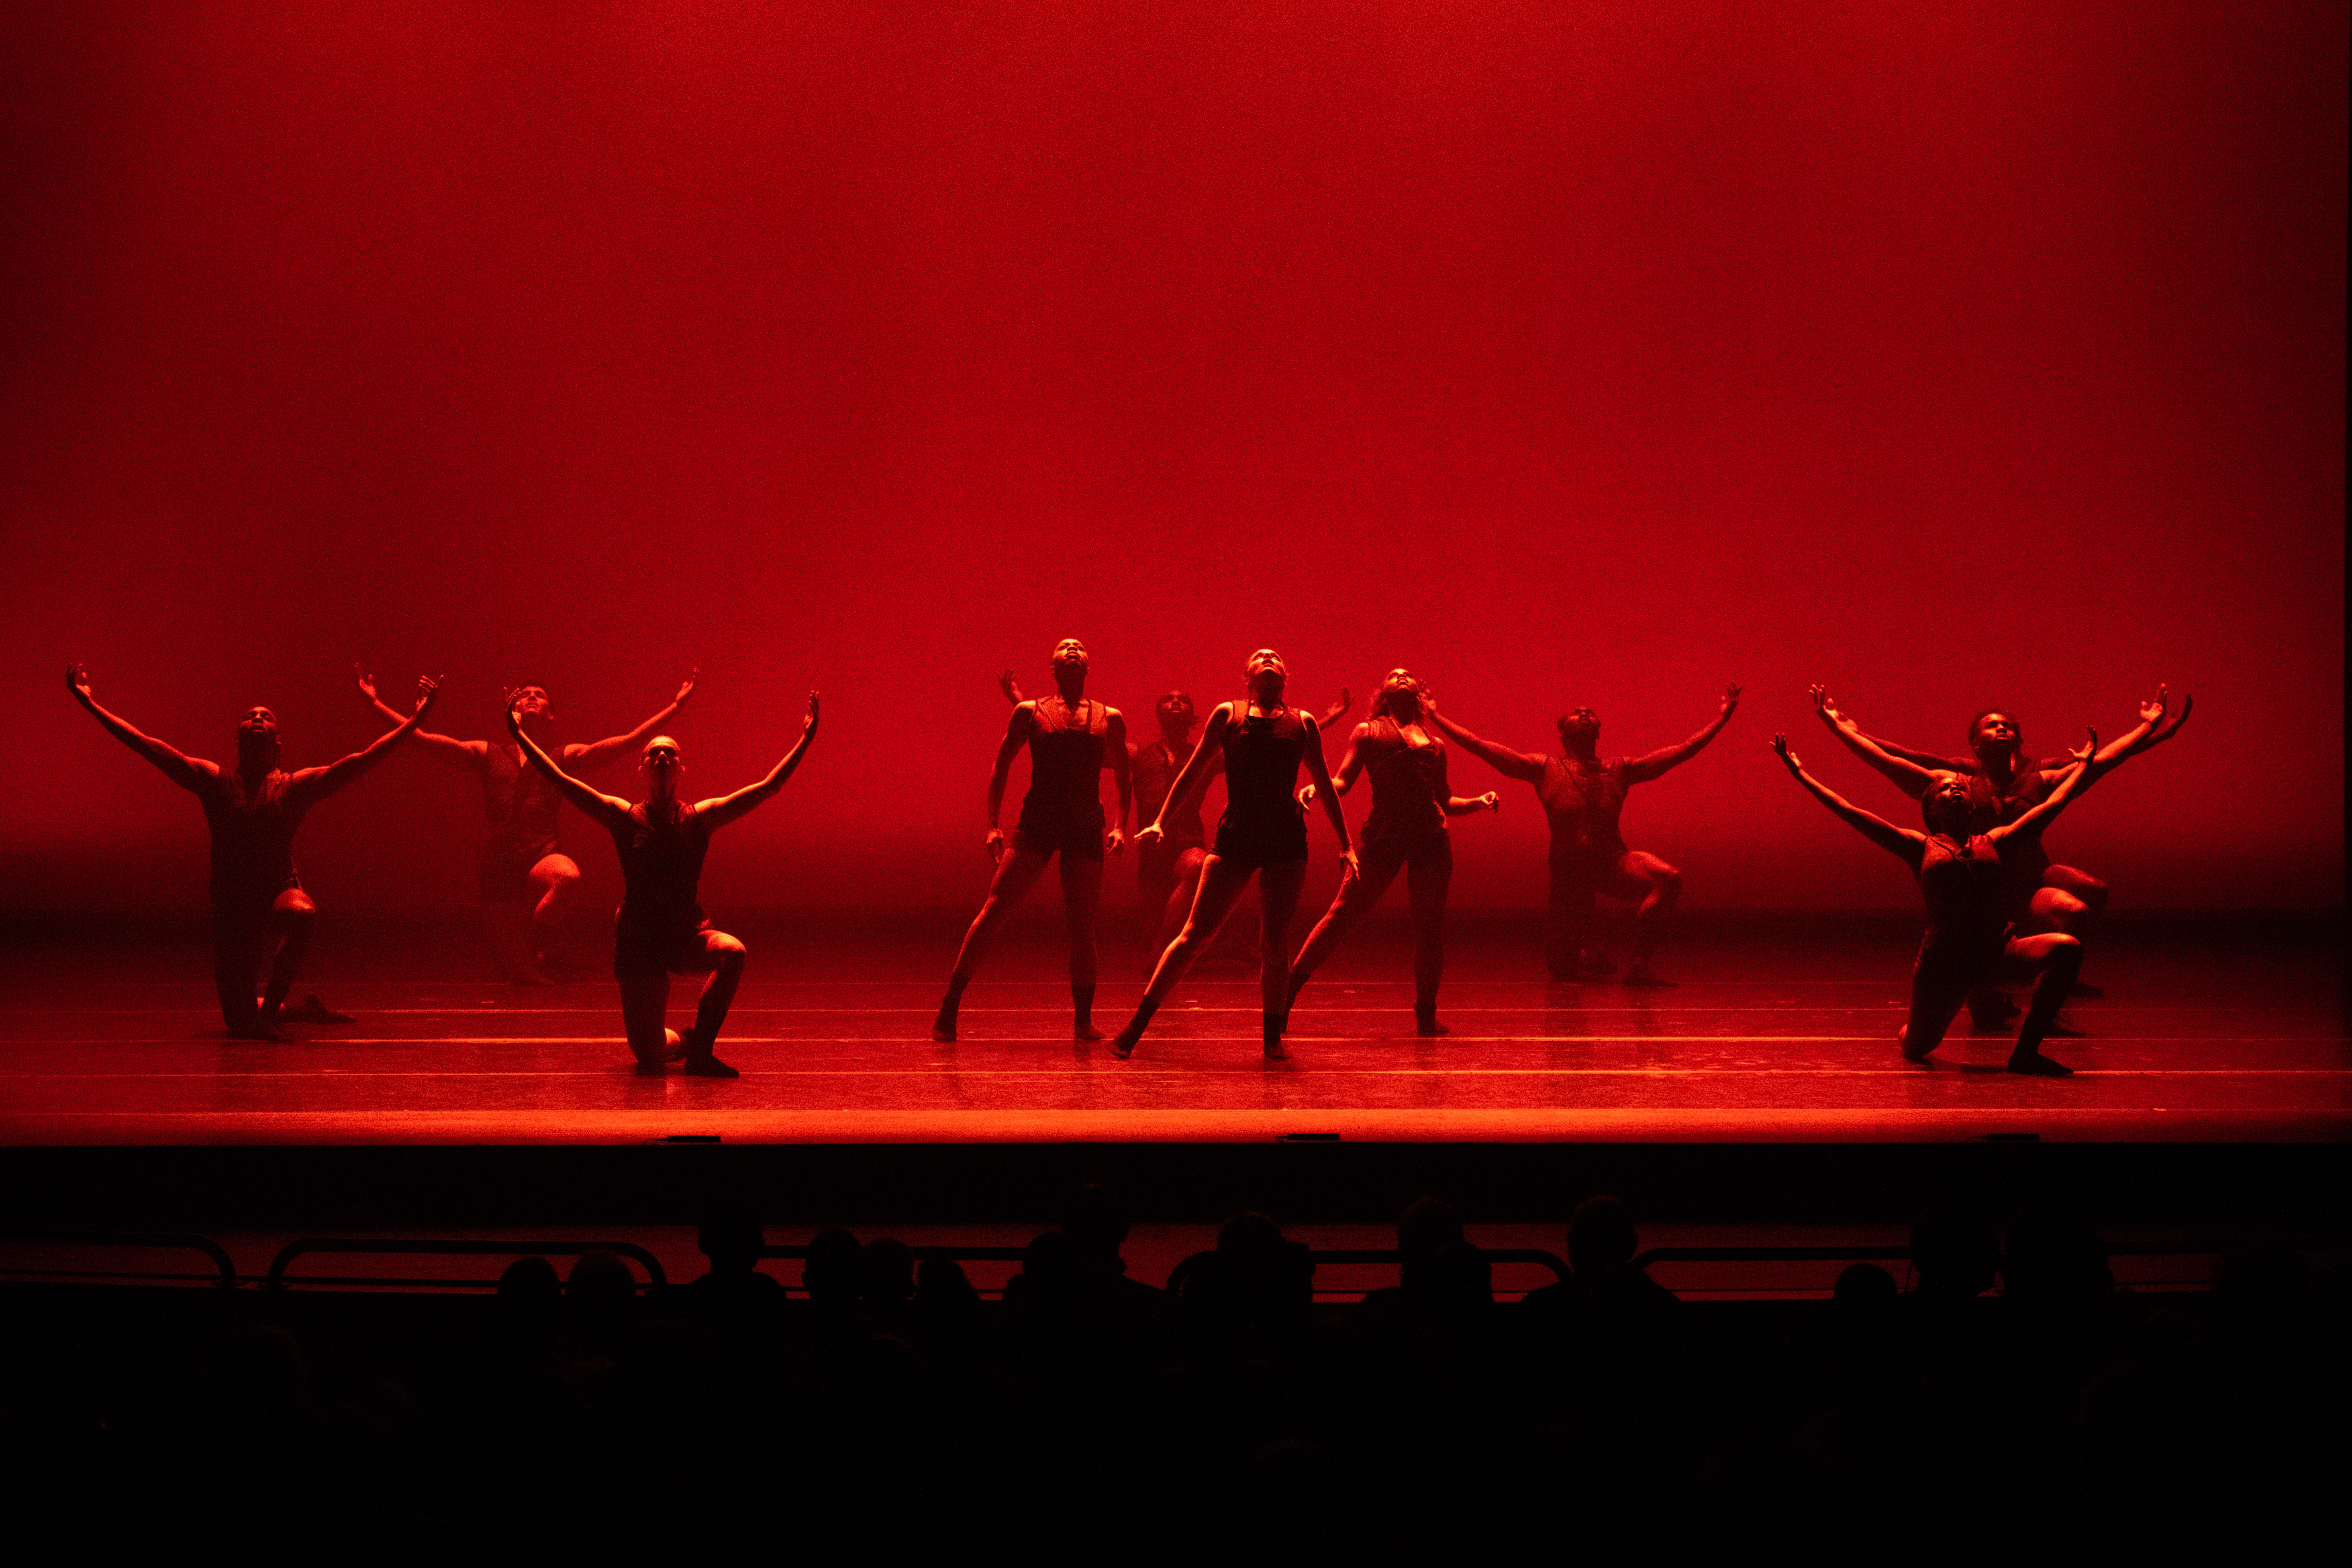 Clusters of dancers appears on a stage awash in red, their faces falling into shadow. A trio at the center stands leaning into one hip, while encircling them are other dancers on one knee, facing front, their arms curving up from their shoulders.